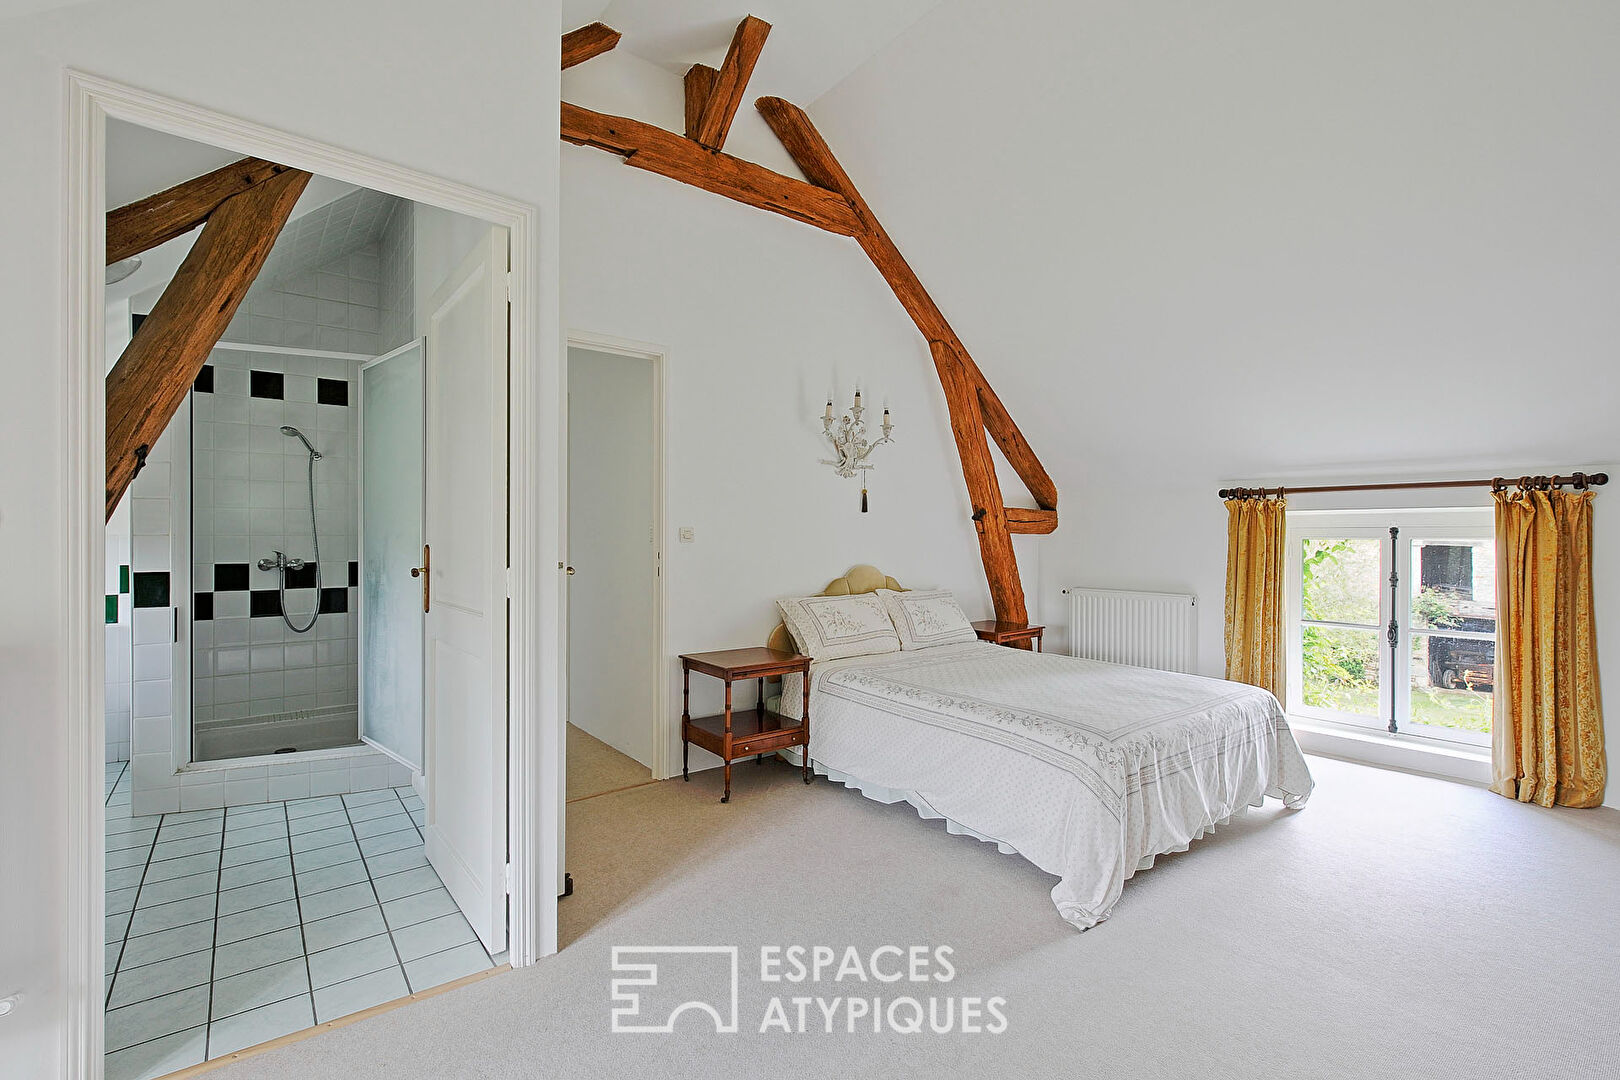 Traditional 18th century Briarde farmhouse on the edge of the forest